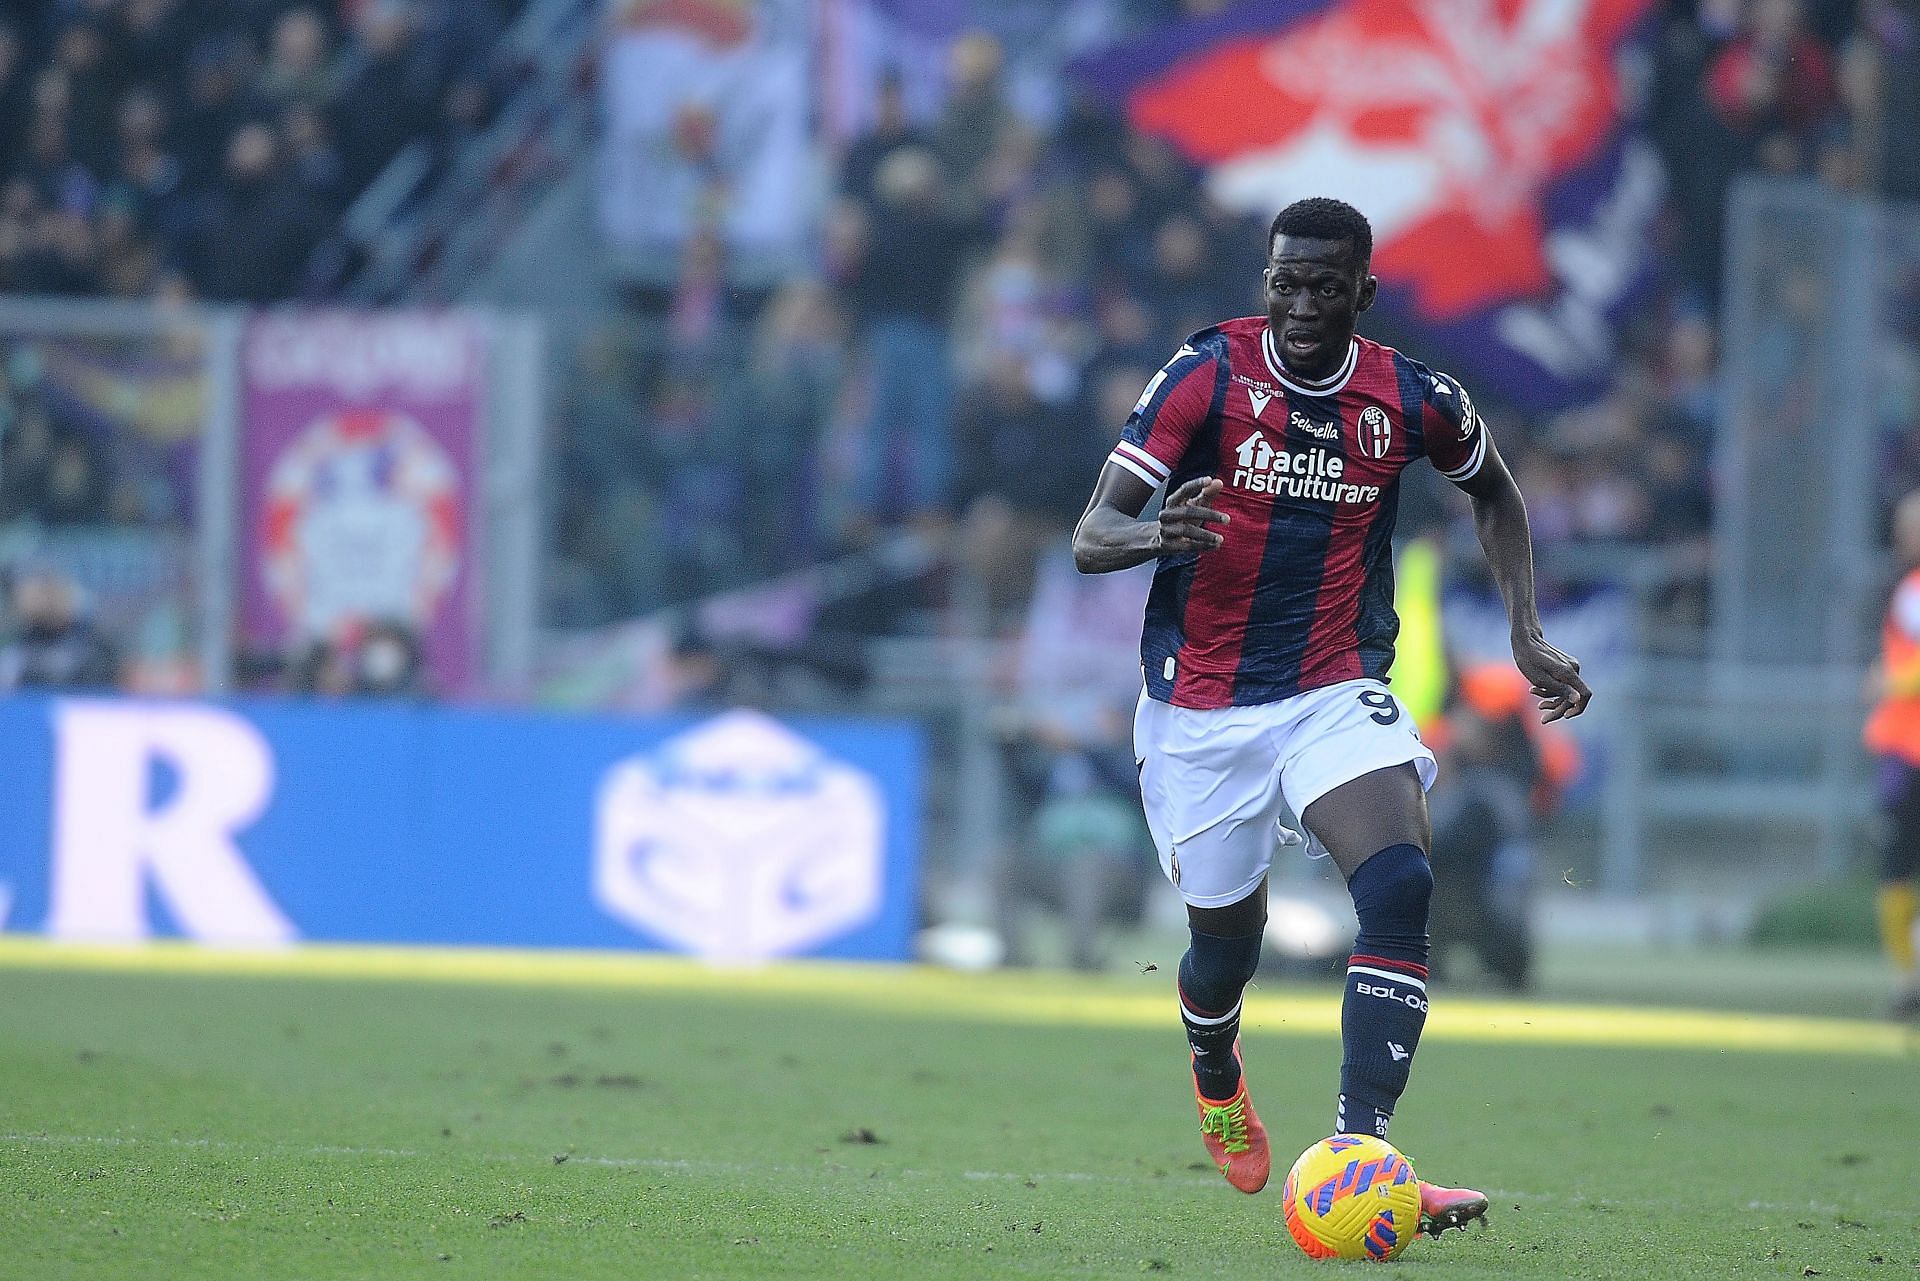 Bologna will be without Gambia international Musa Barrow due to AFCON